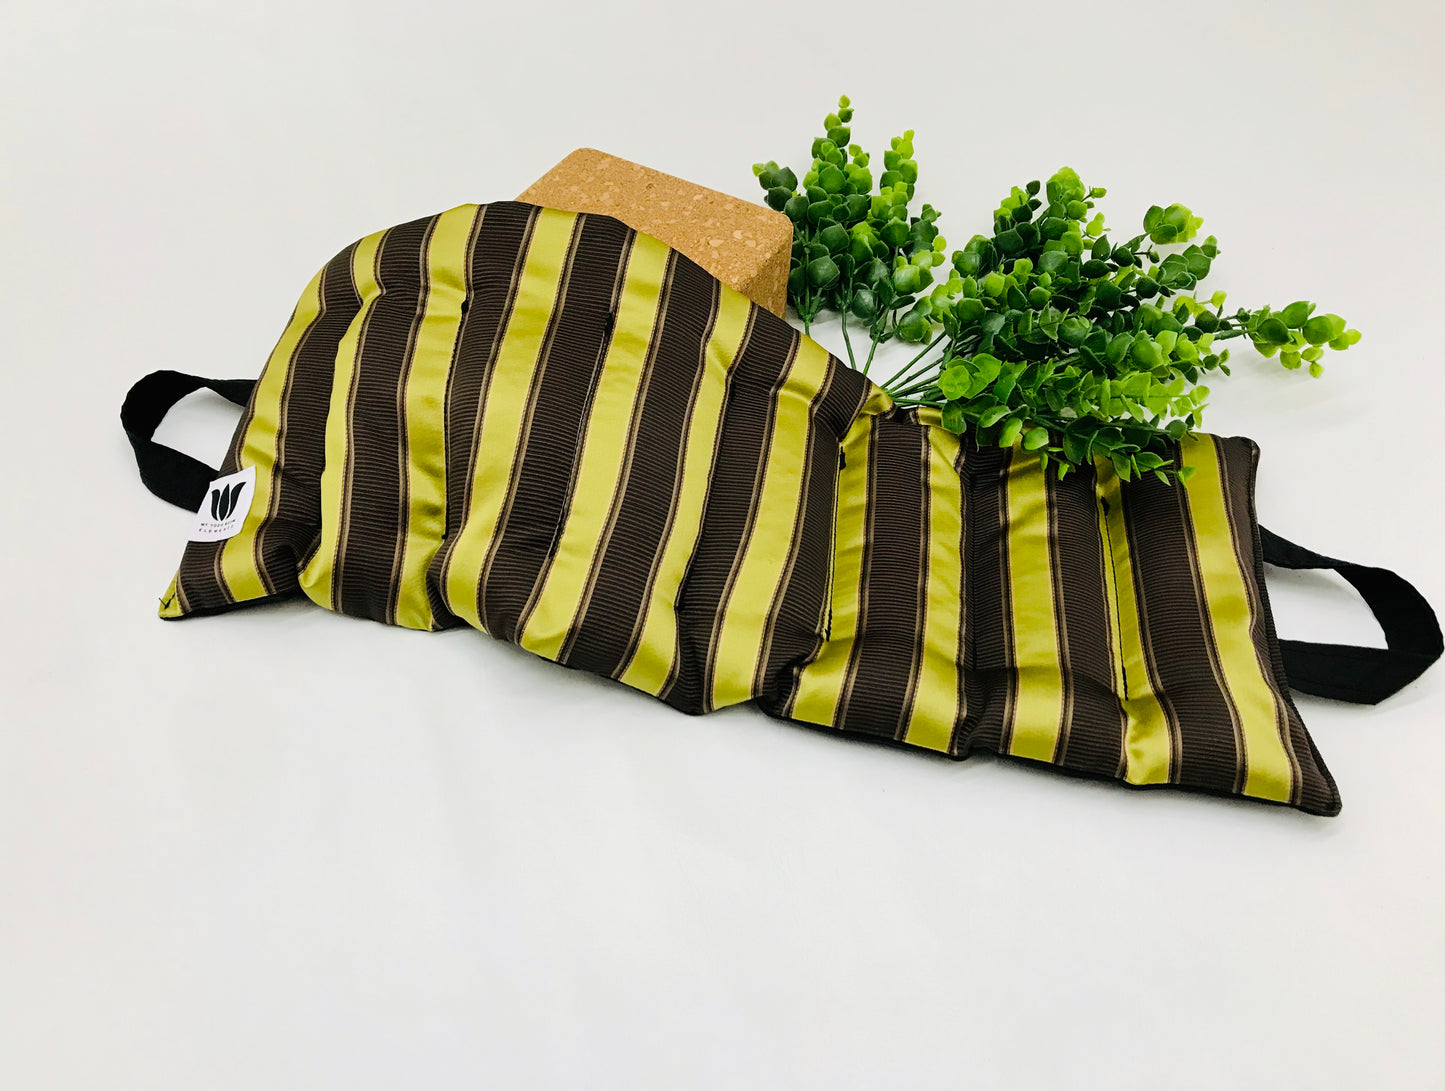 Yoga Sandbag version by My Yoga Room Elements. Add grounding to your practice with this heatable yoga prop. Handcrafted in Calgary in sateen striped fabric.